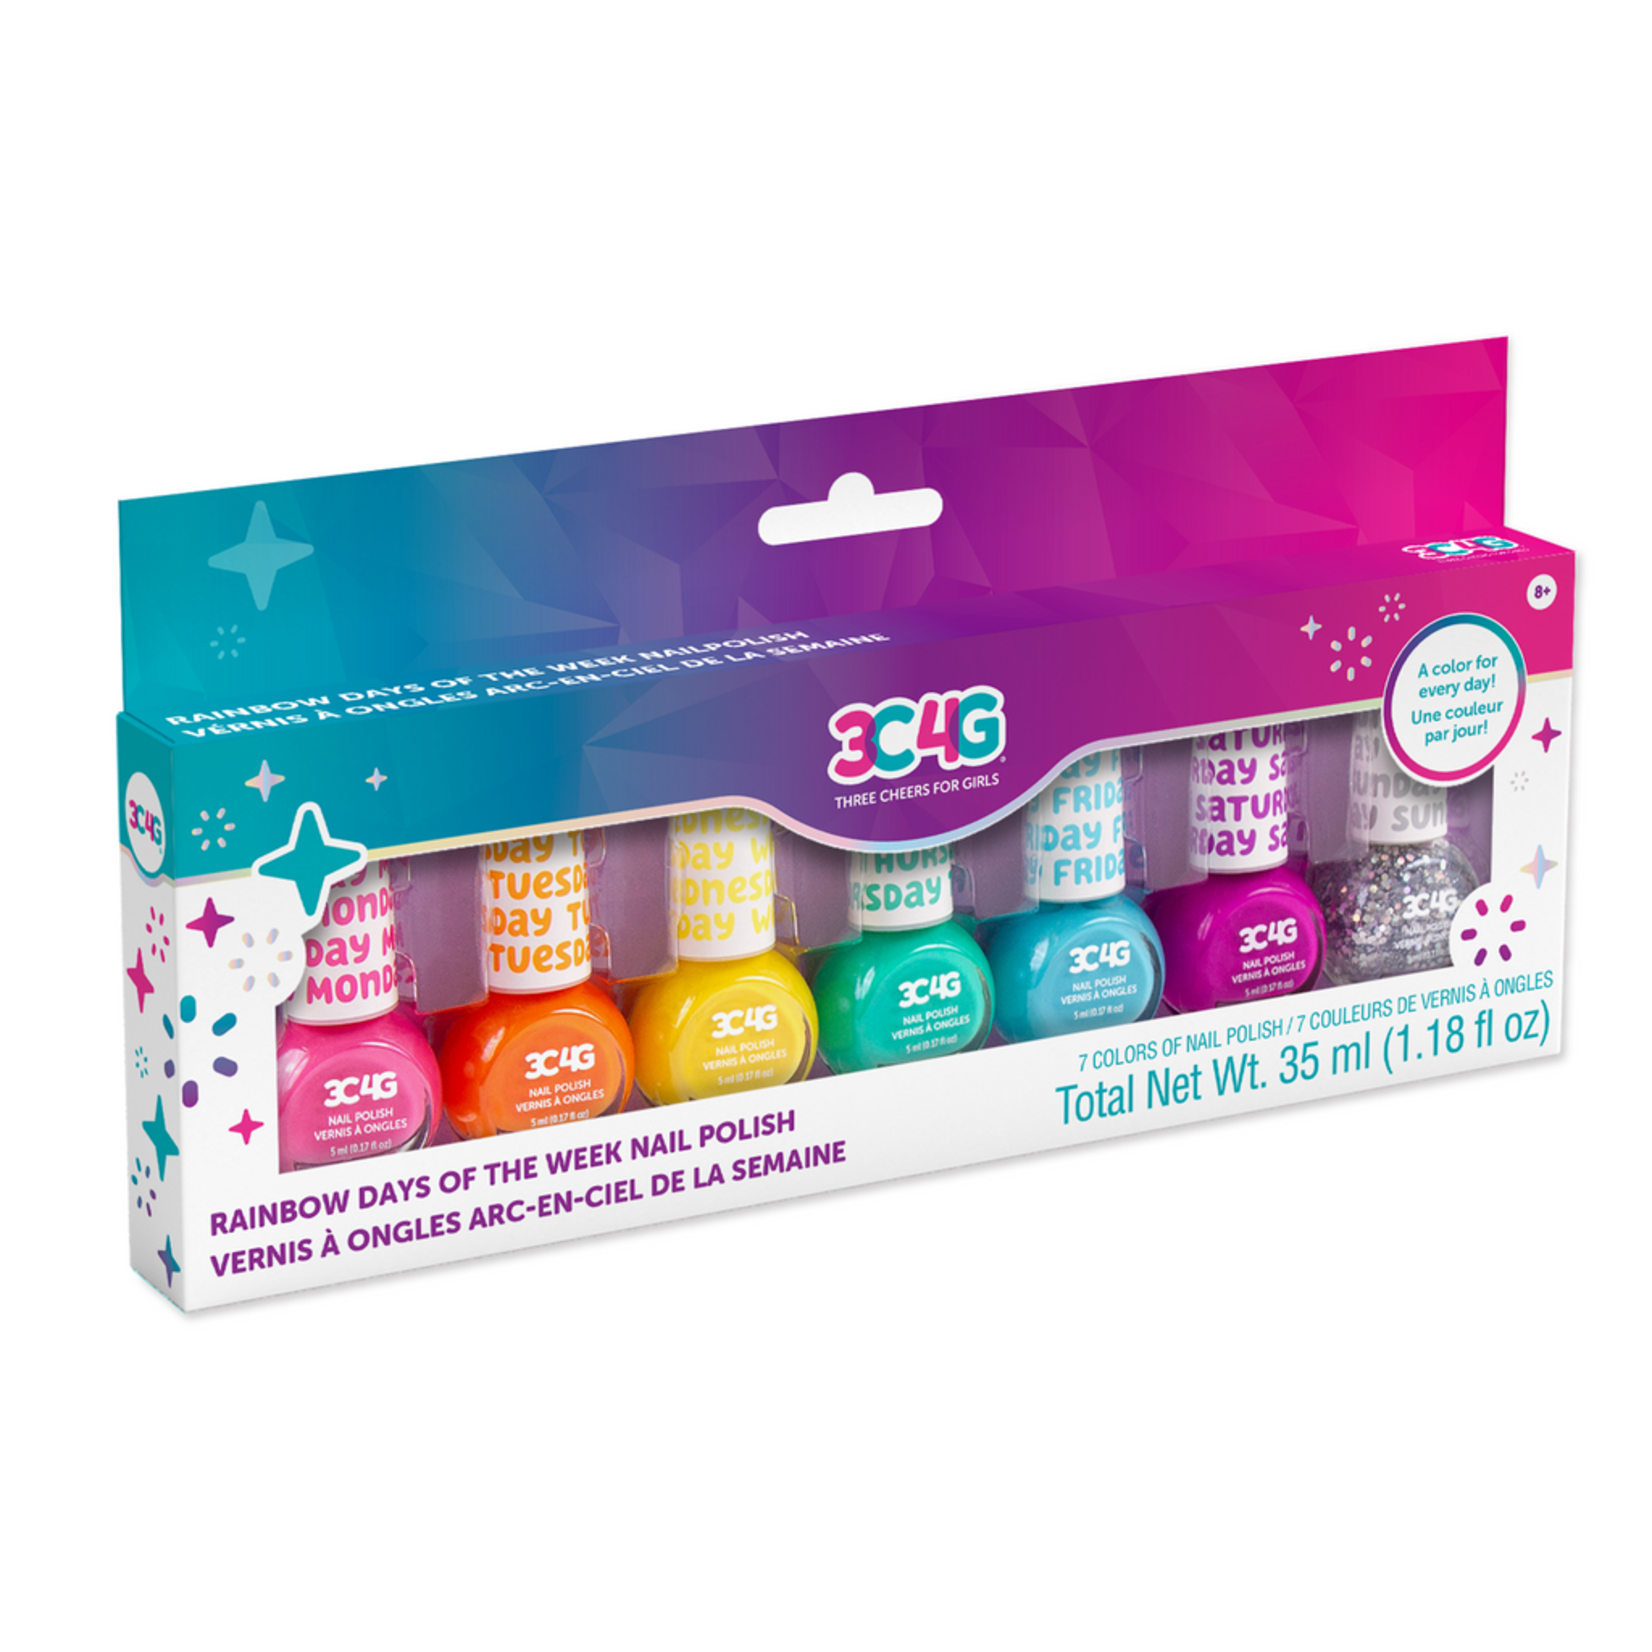 Make It Real Three Cheers for Girls Rainbow Bright Nail Polish: Days of the Week